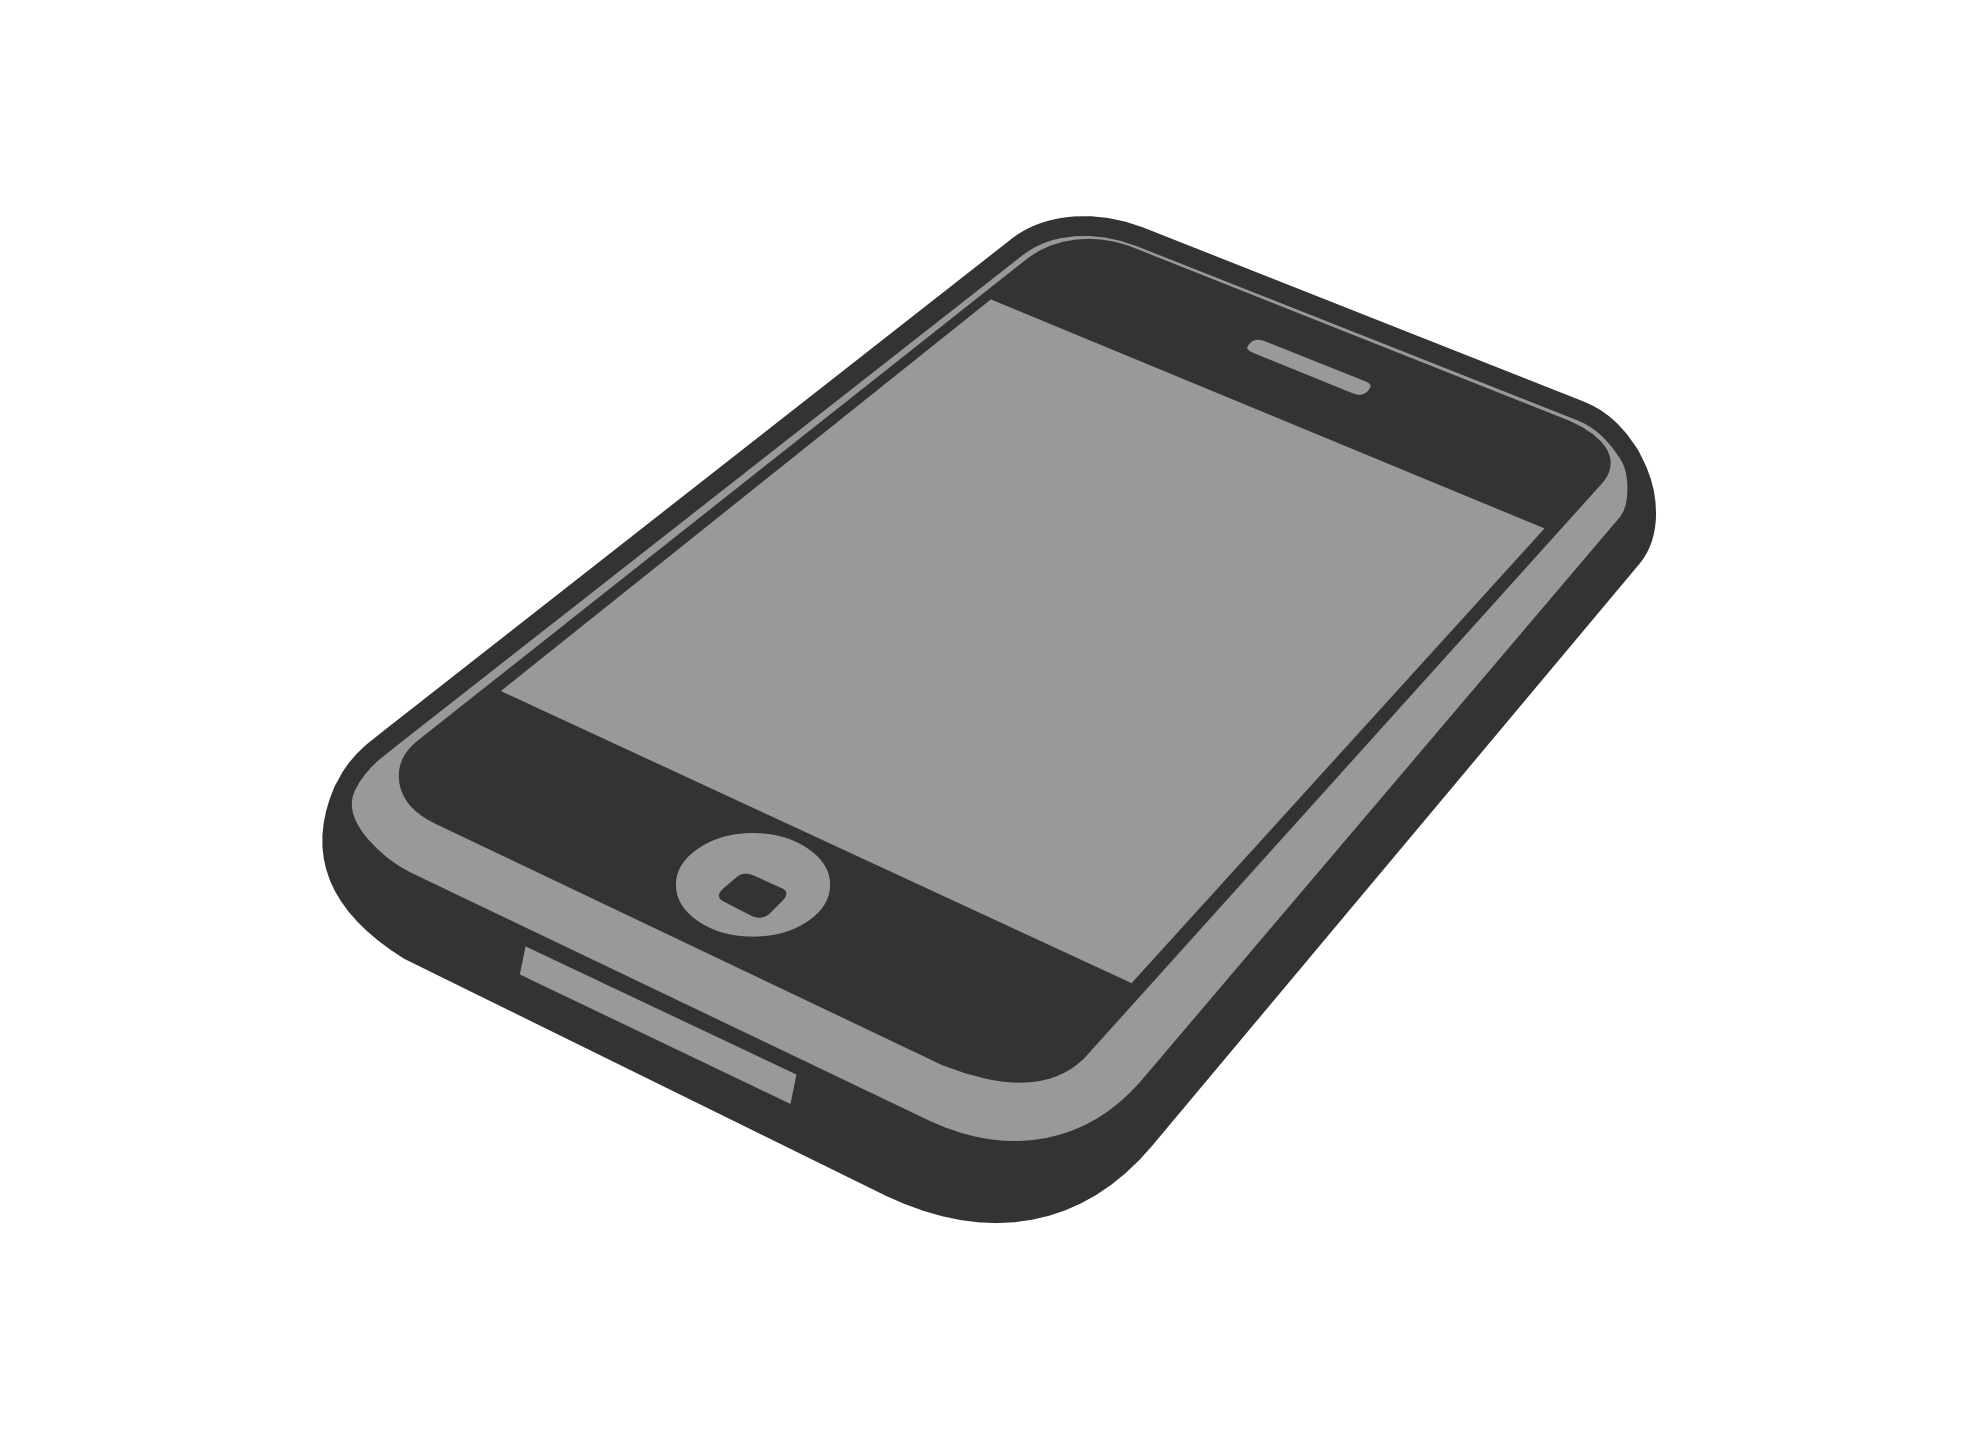 Top iphone clip art image for